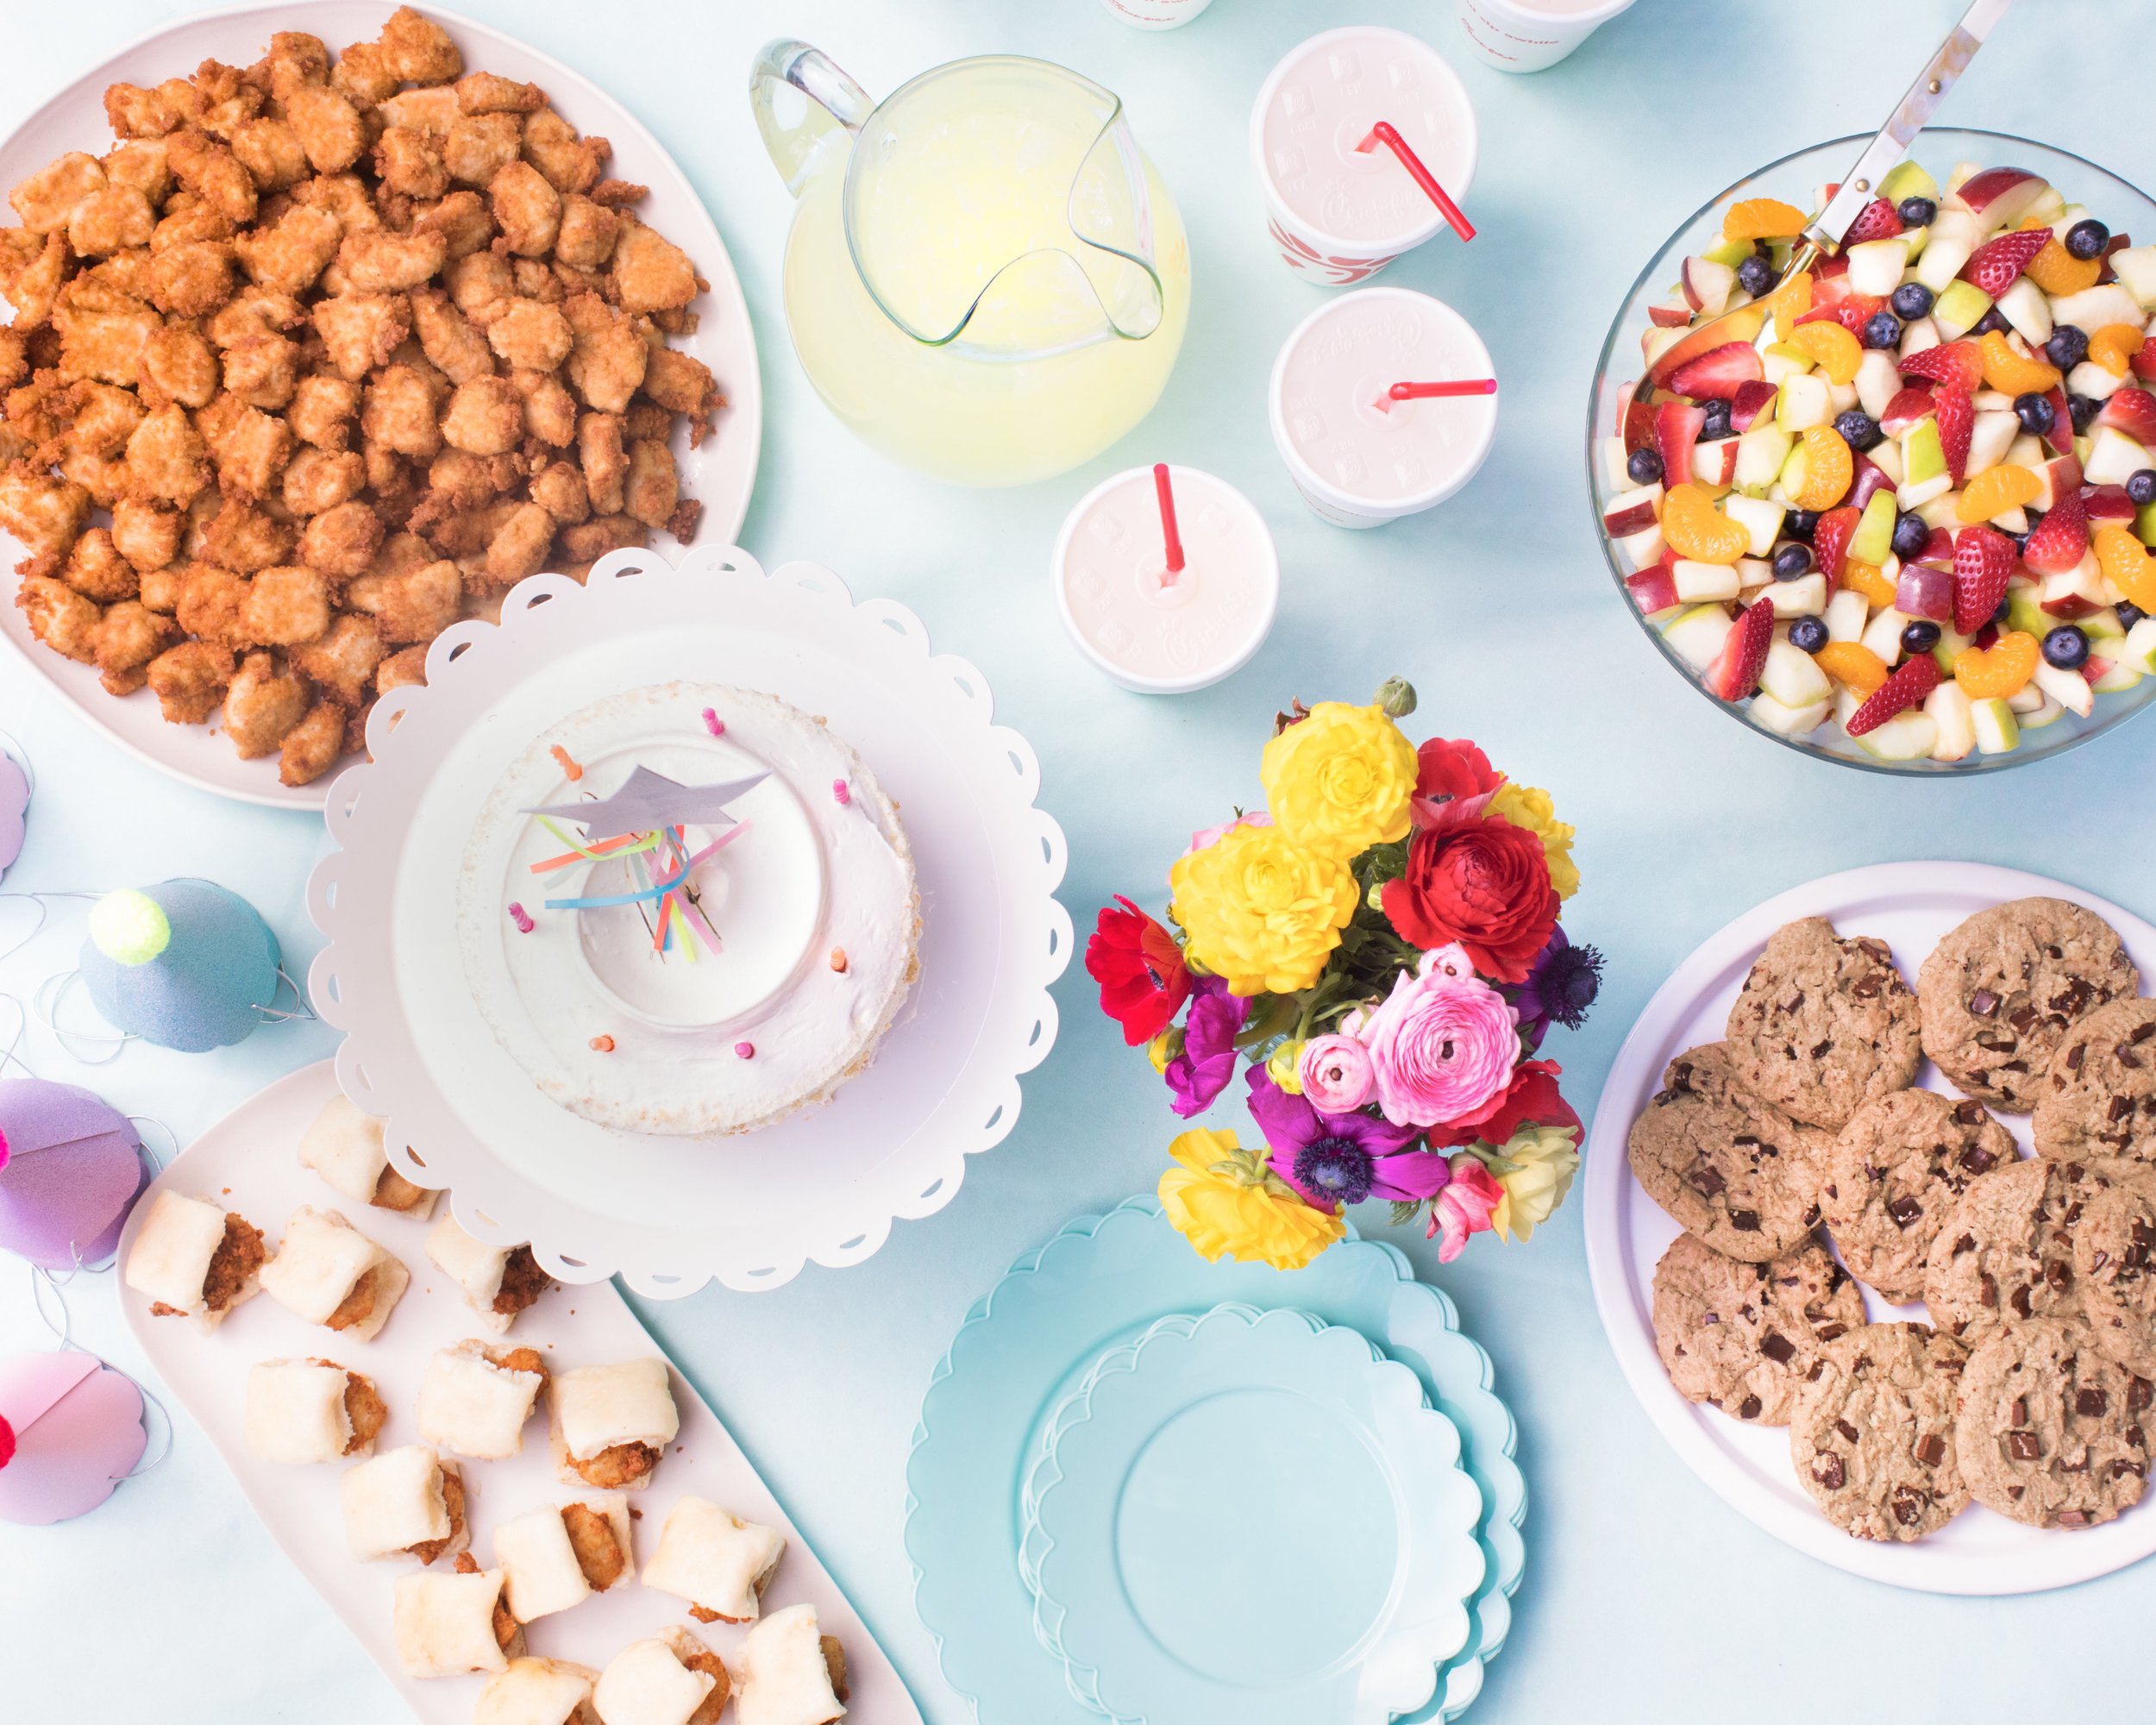 Nuggets and chicken minis at pastel birthday table with flowers